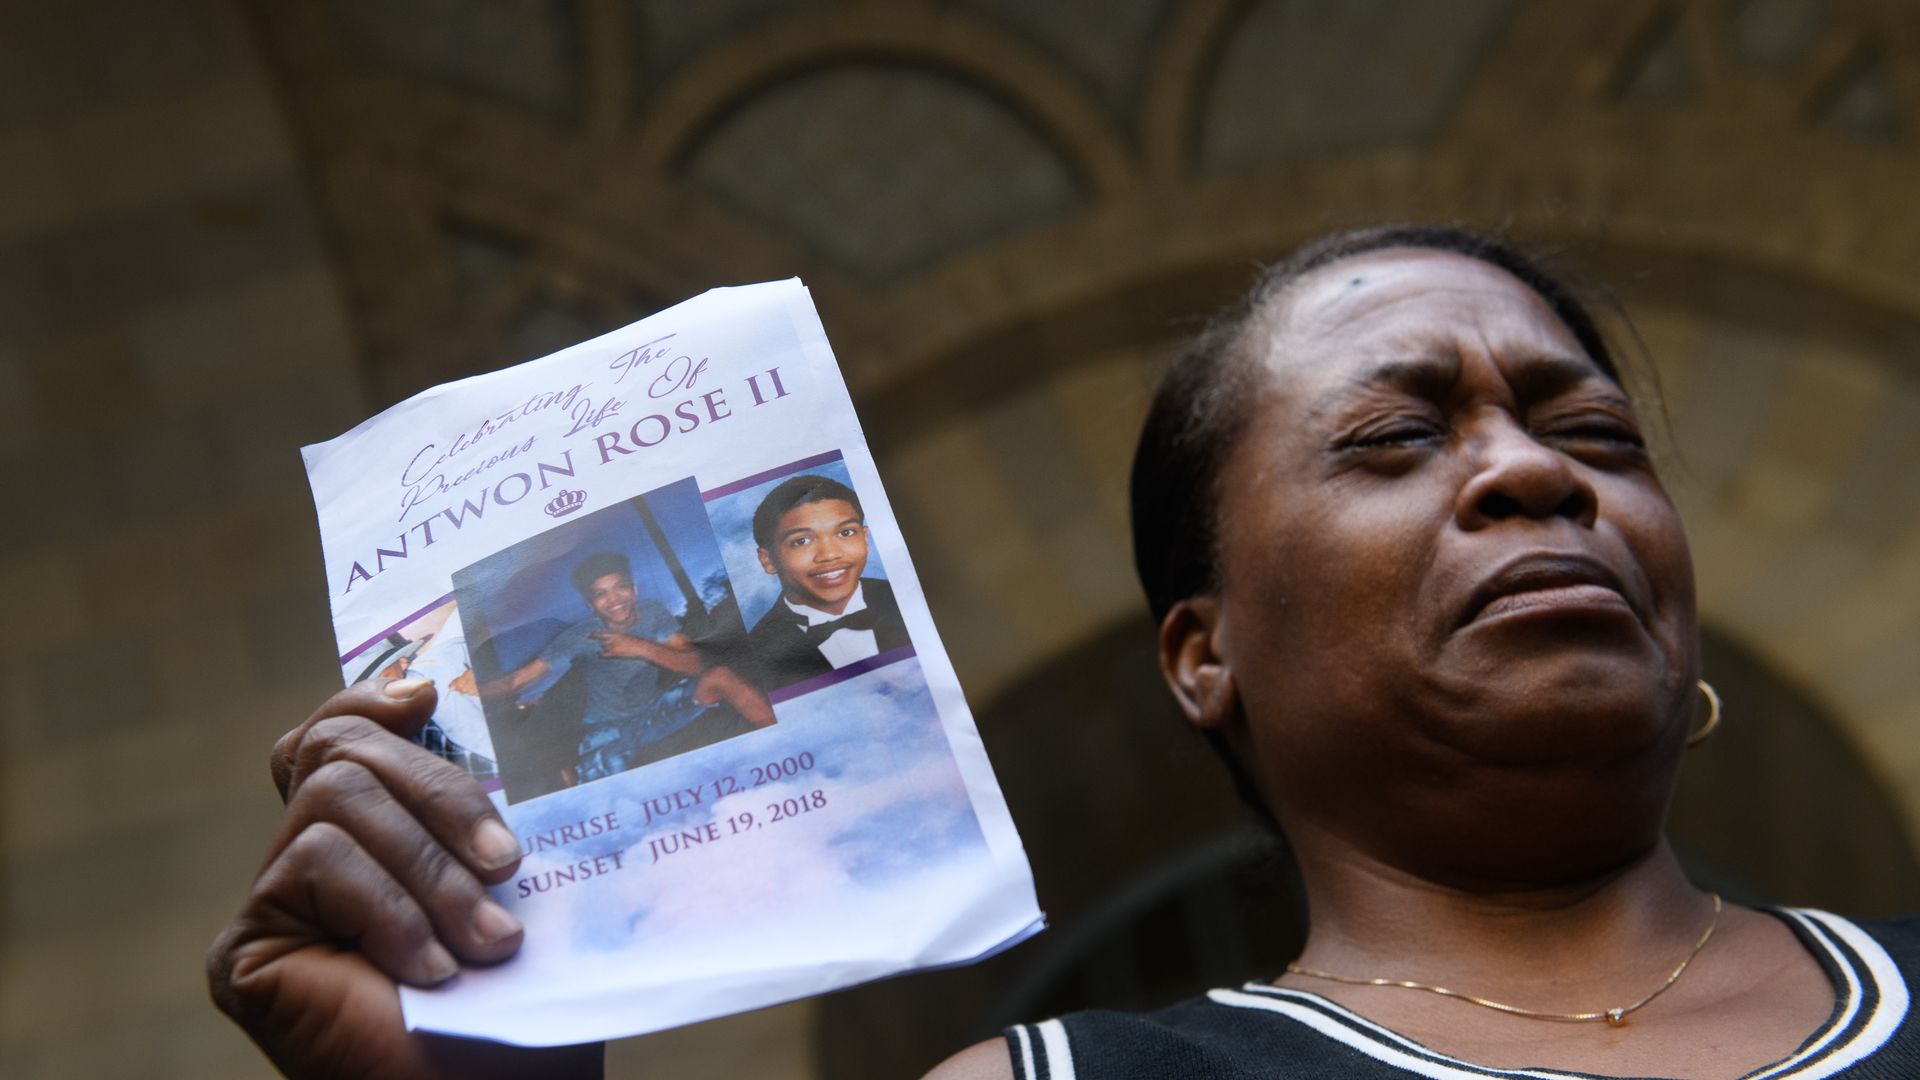  Carmen Ashley, the great aunt of Antwon Rose II, cries as she holds the memorial card from Rose's funeral in this file photo.